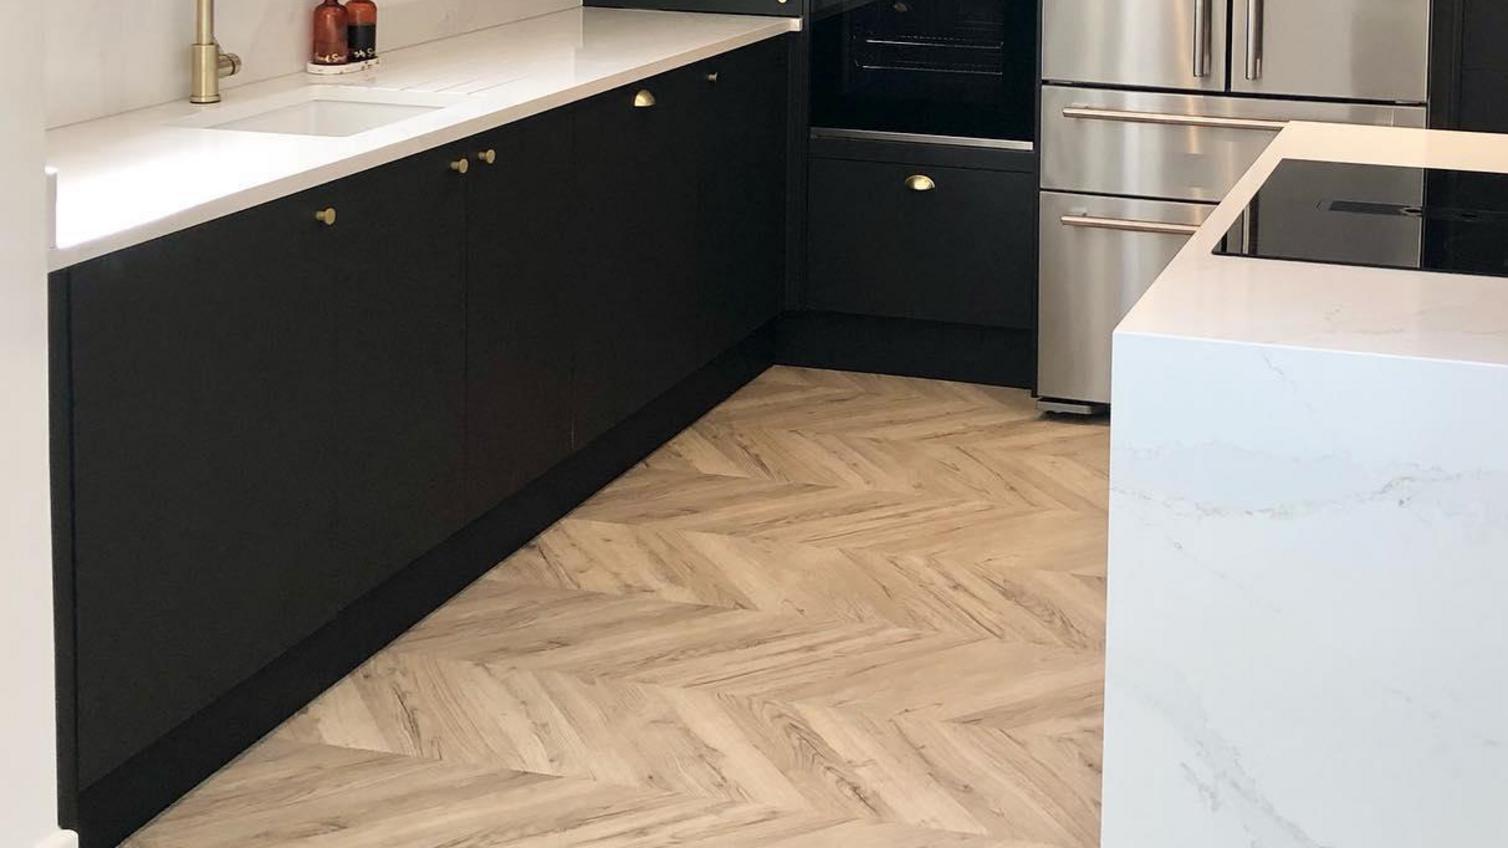 Charcoal slab kitchen design with gold cup handles. white worktops, integrated appliances and chevron flooring.